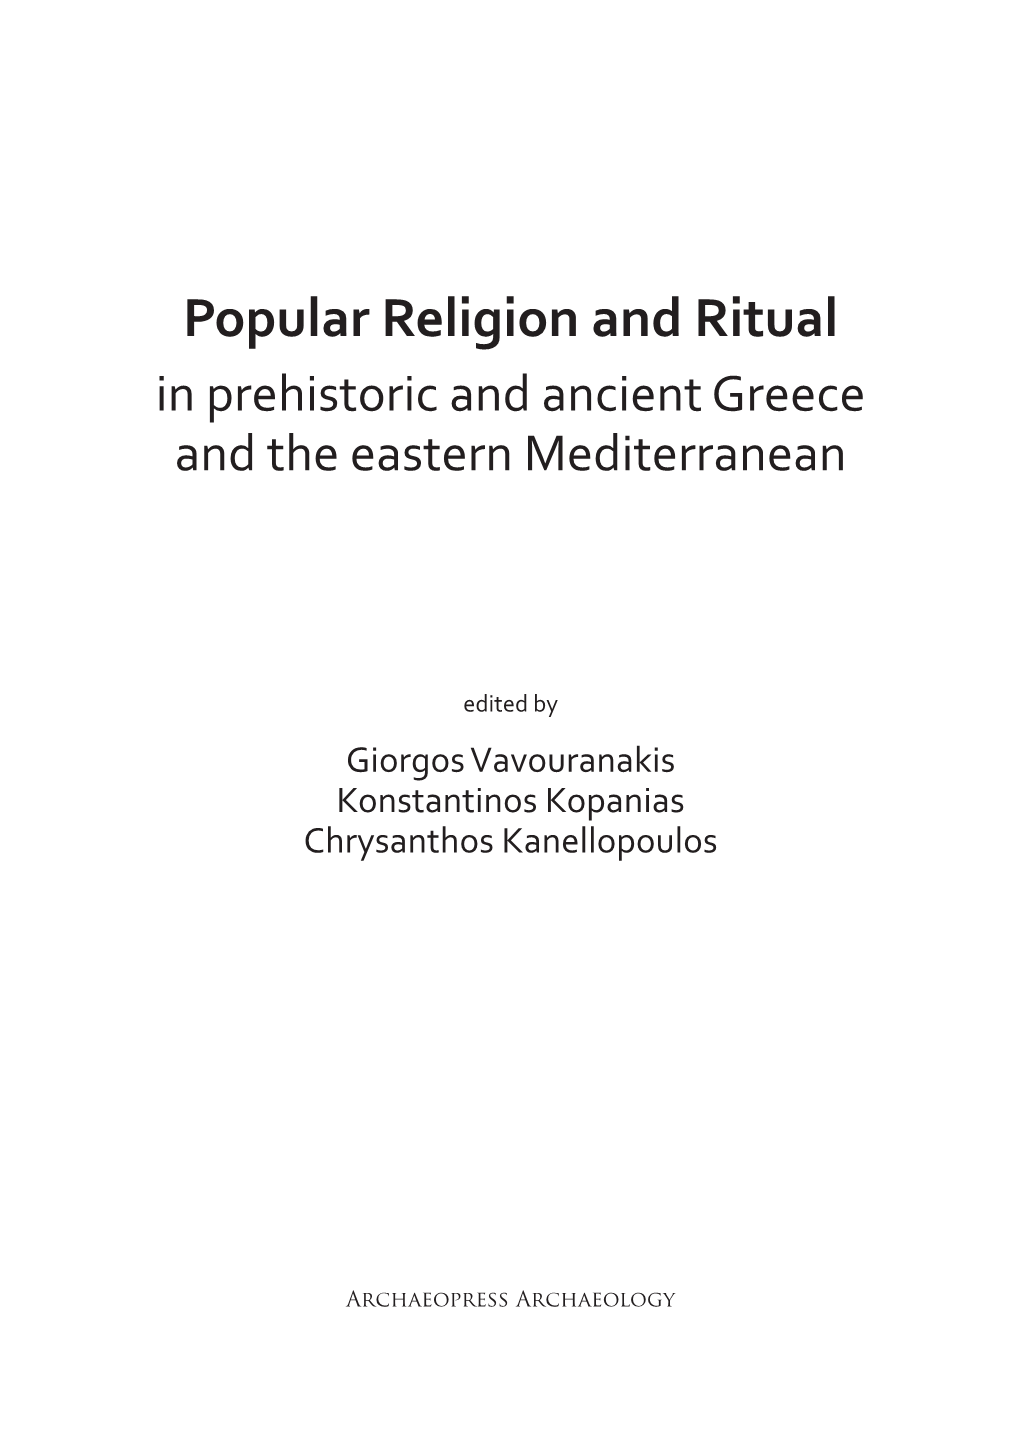 Popular Religion and Ritual in Prehistoric and Ancient Greece and the Eastern Mediterranean